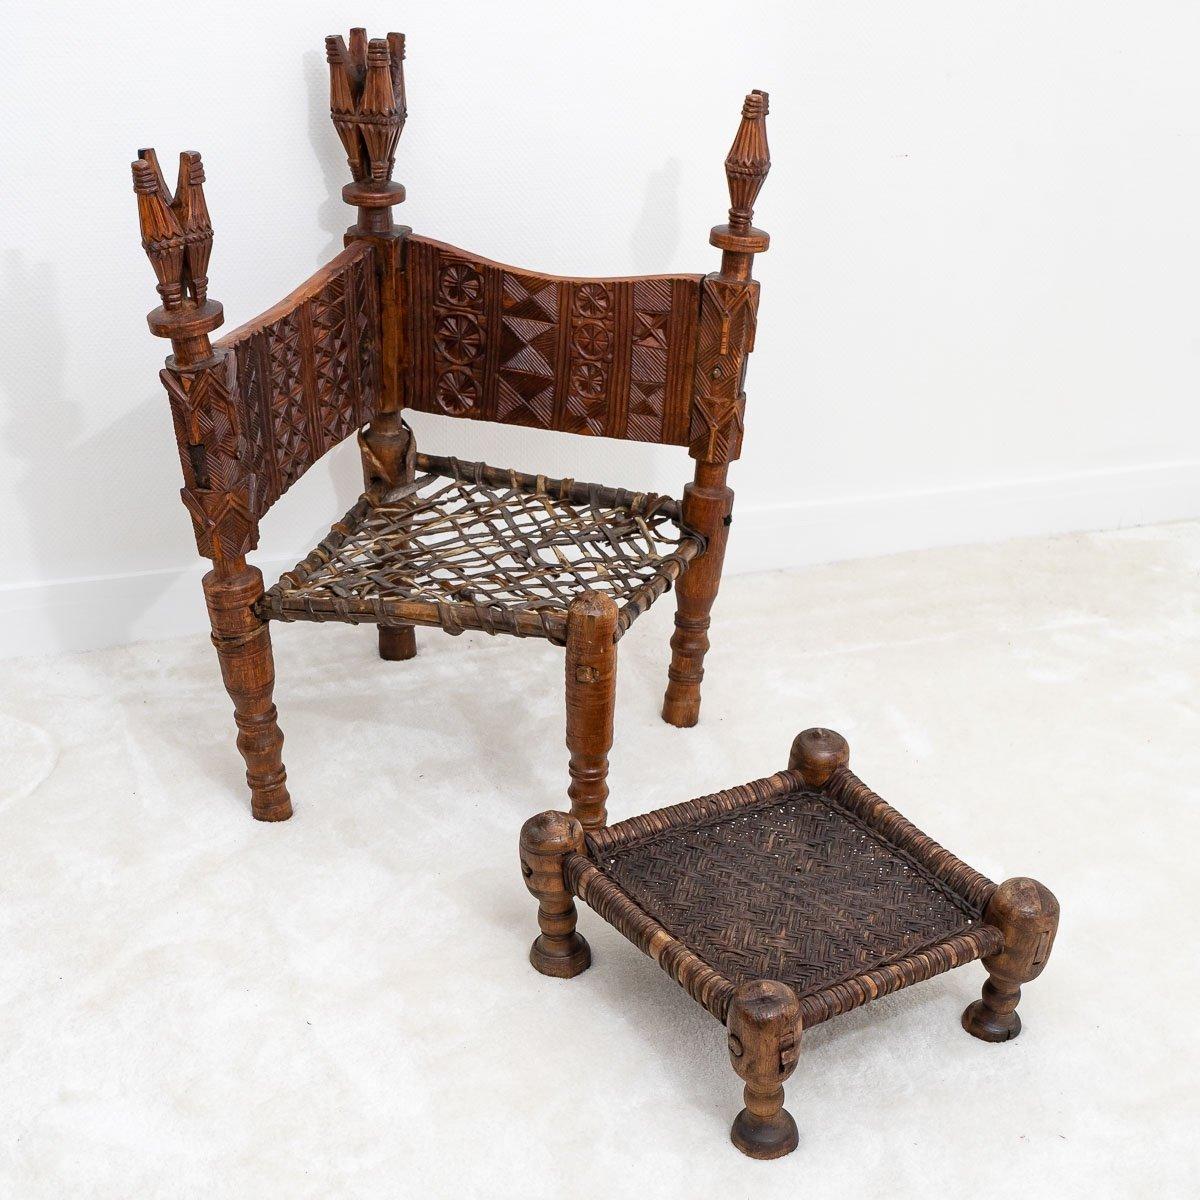 Magnificent set of two honorary chairs and a footrest made of solid cedar wood, handcrafted in the purest tradition of Nuristan in Afghanistan with woven leather covering. 

Period : 19th century
Circa : 1885 - 1890
Dimensions : Armchair 1 : Height